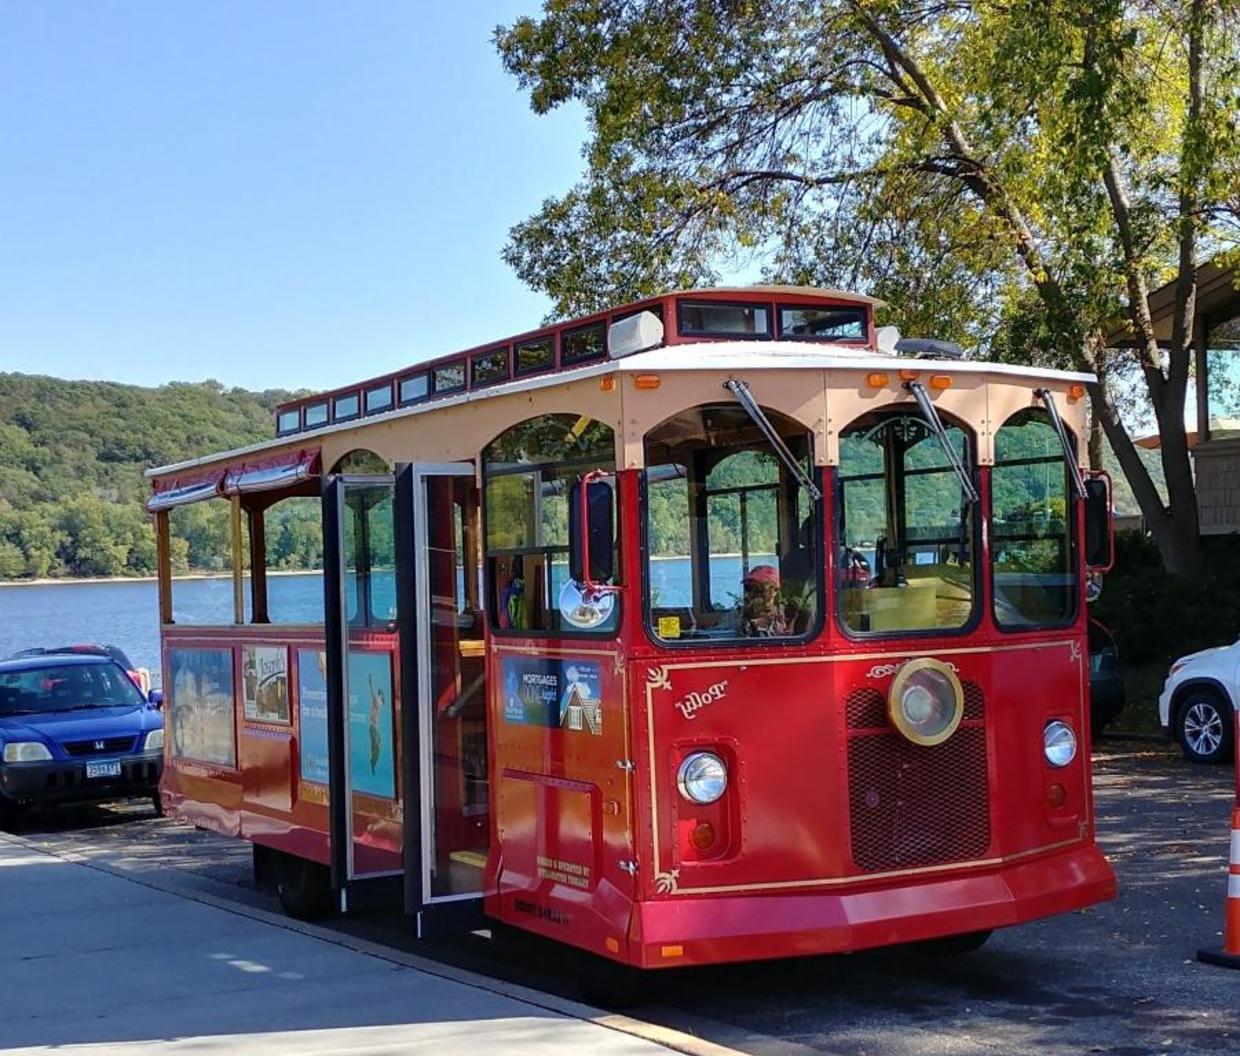 trolley tour is